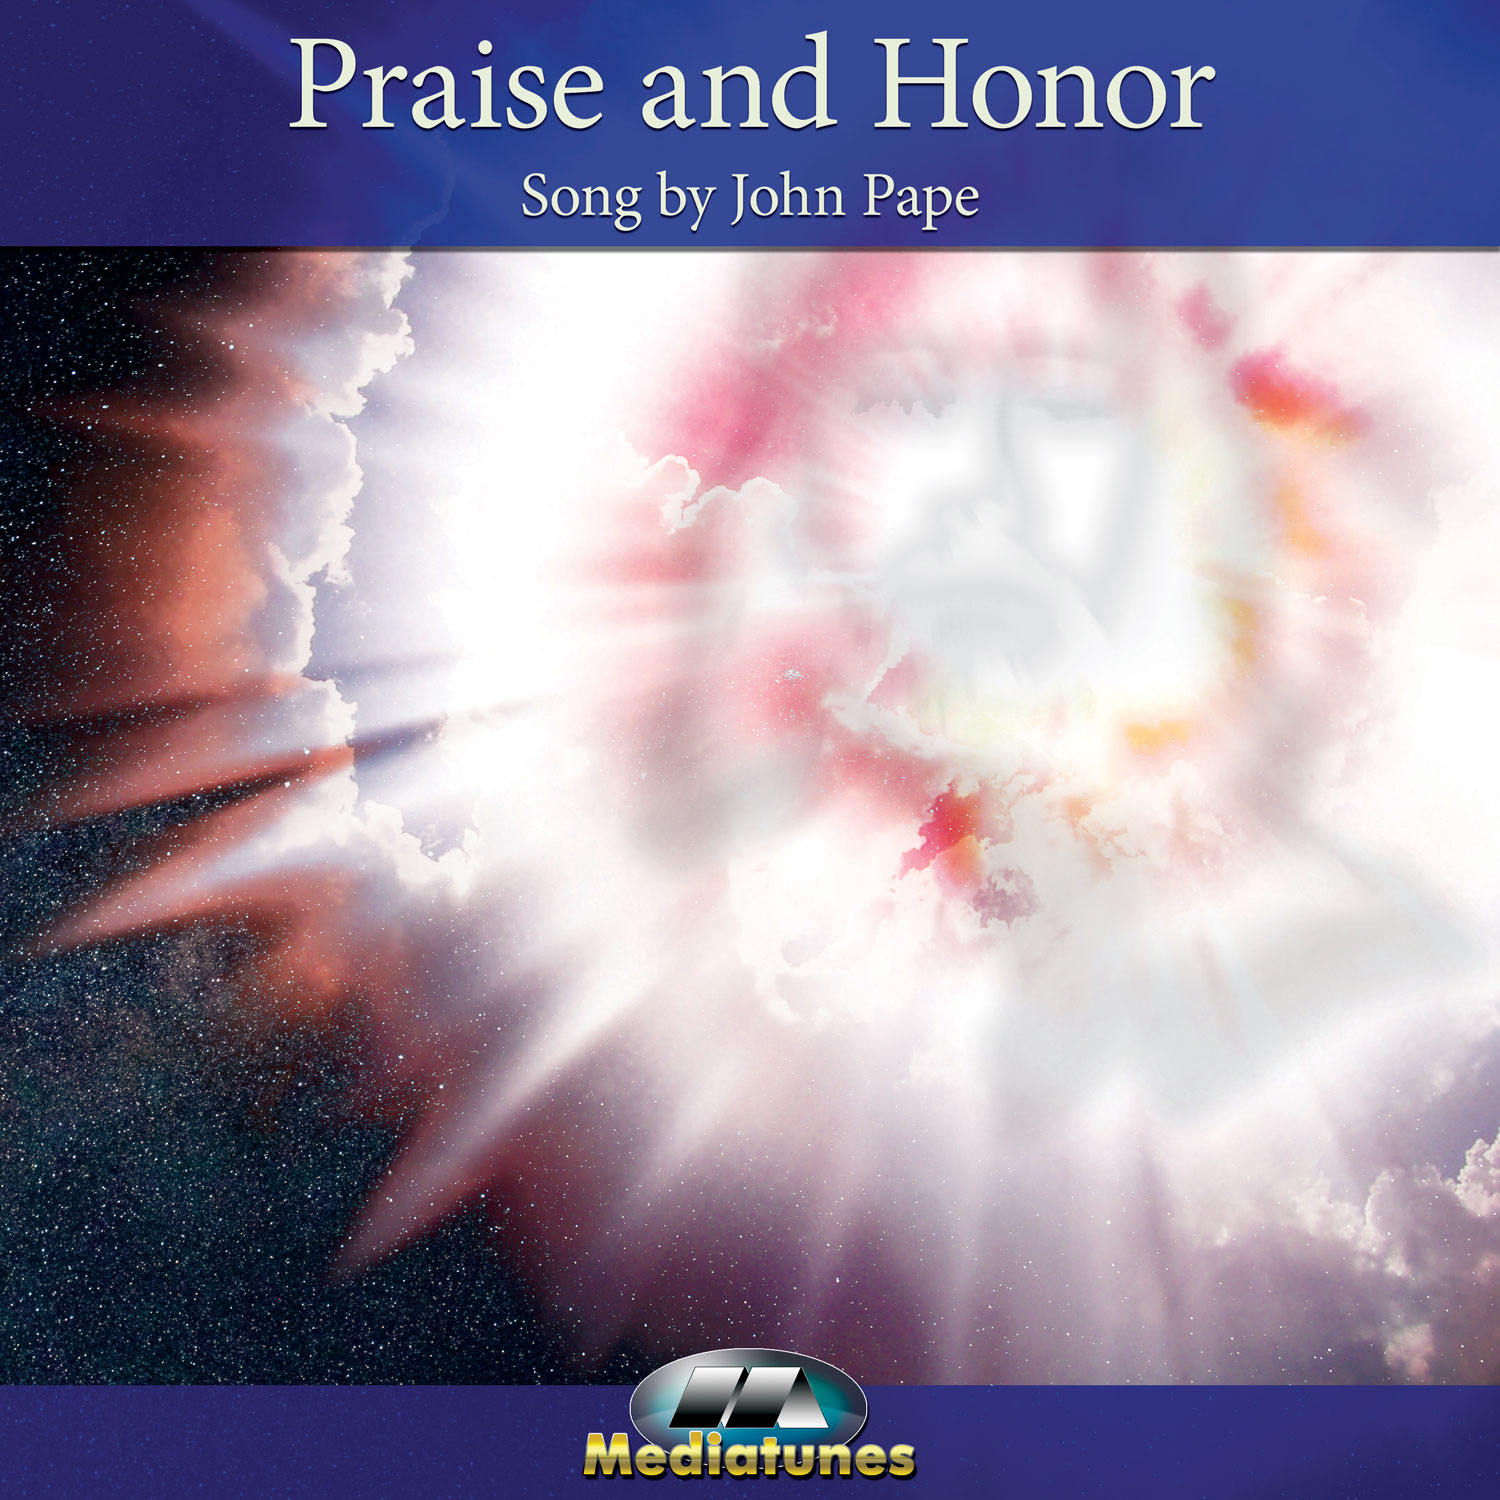 Meaning of Praise and Honor by John Pape